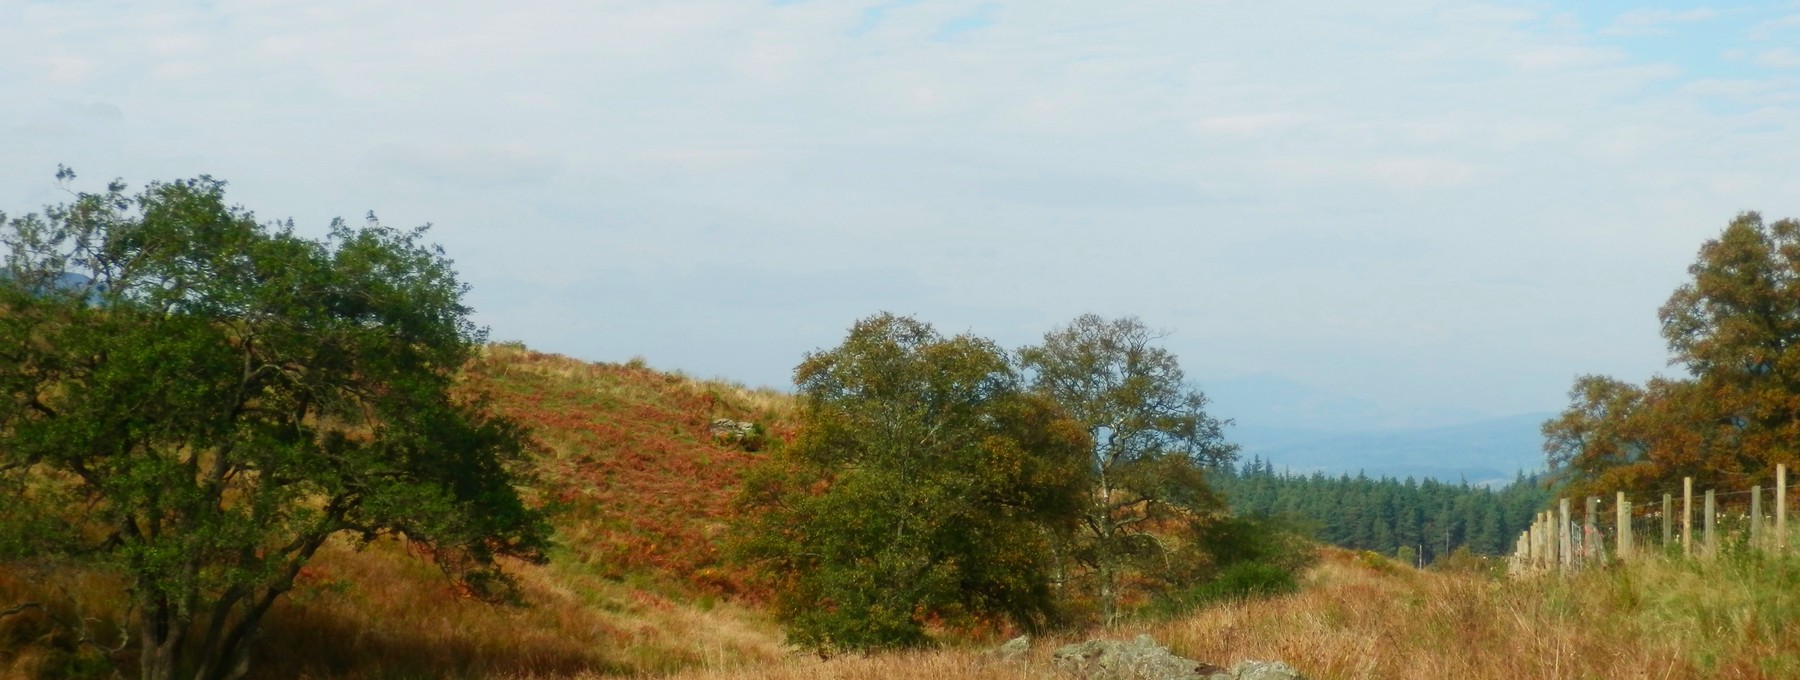 Partridge shoot on Murthly Estate - The autumn colours look perfect on Murthly Estate during a partridge shoot (© Murthly Estate)